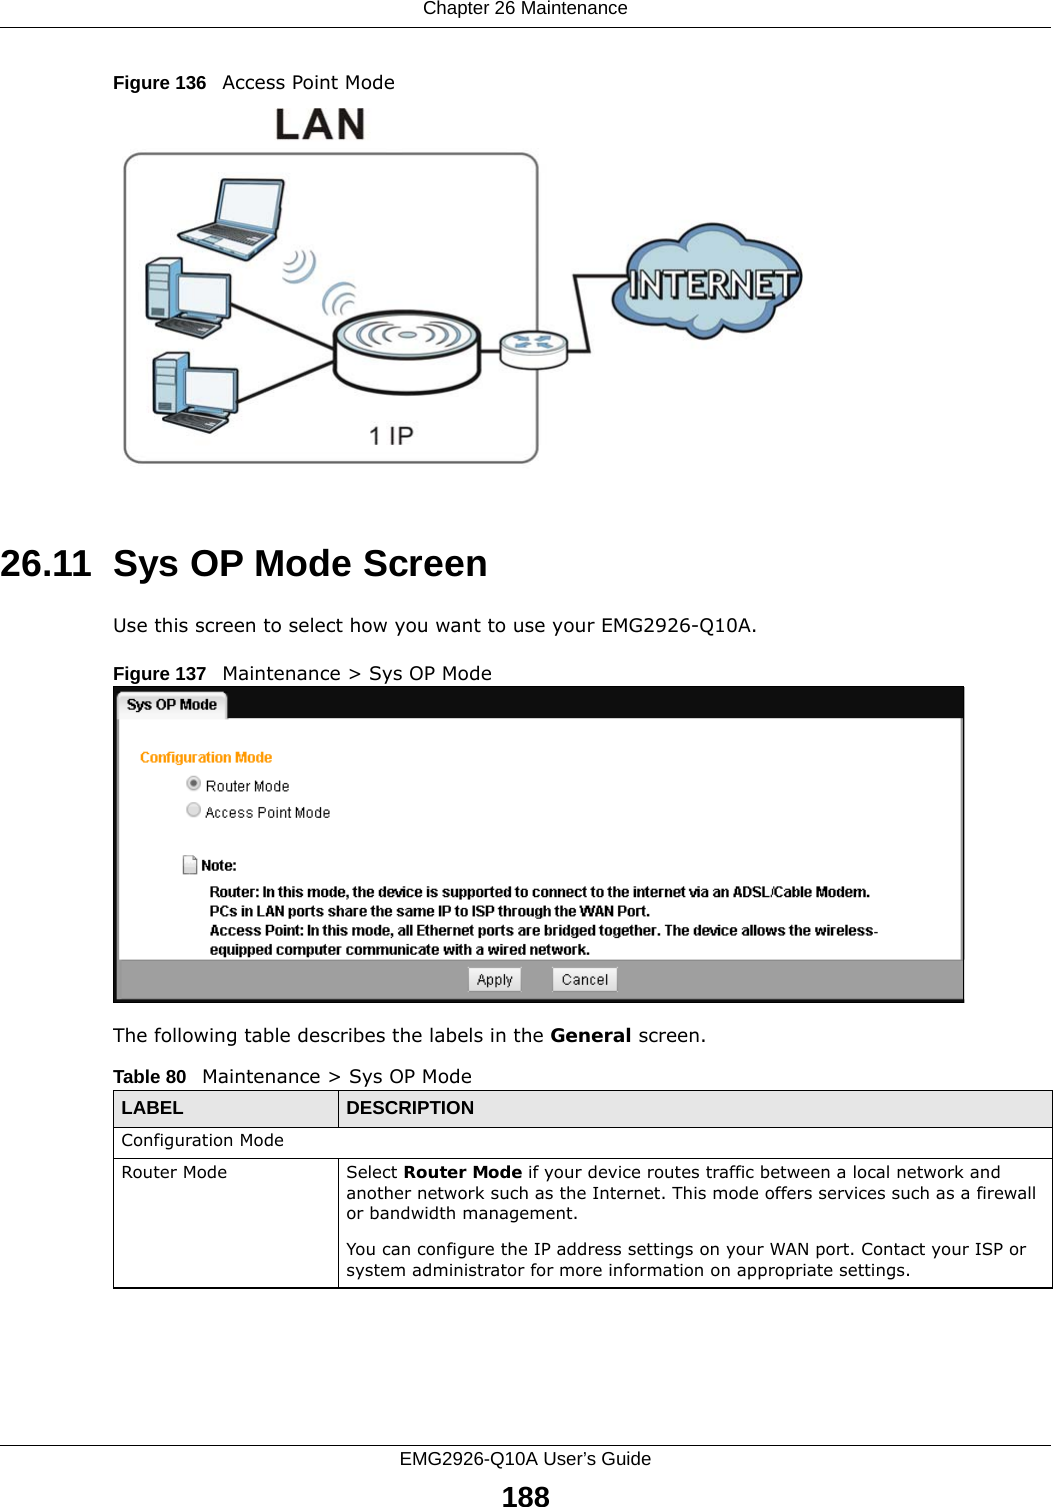 Chapter 26 MaintenanceEMG2926-Q10A User’s Guide188Figure 136   Access Point Mode26.11  Sys OP Mode ScreenUse this screen to select how you want to use your EMG2926-Q10A. Figure 137   Maintenance &gt; Sys OP Mode The following table describes the labels in the General screen.Table 80   Maintenance &gt; Sys OP ModeLABEL DESCRIPTIONConfiguration ModeRouter Mode Select Router Mode if your device routes traffic between a local network and another network such as the Internet. This mode offers services such as a firewall or bandwidth management.You can configure the IP address settings on your WAN port. Contact your ISP or system administrator for more information on appropriate settings.